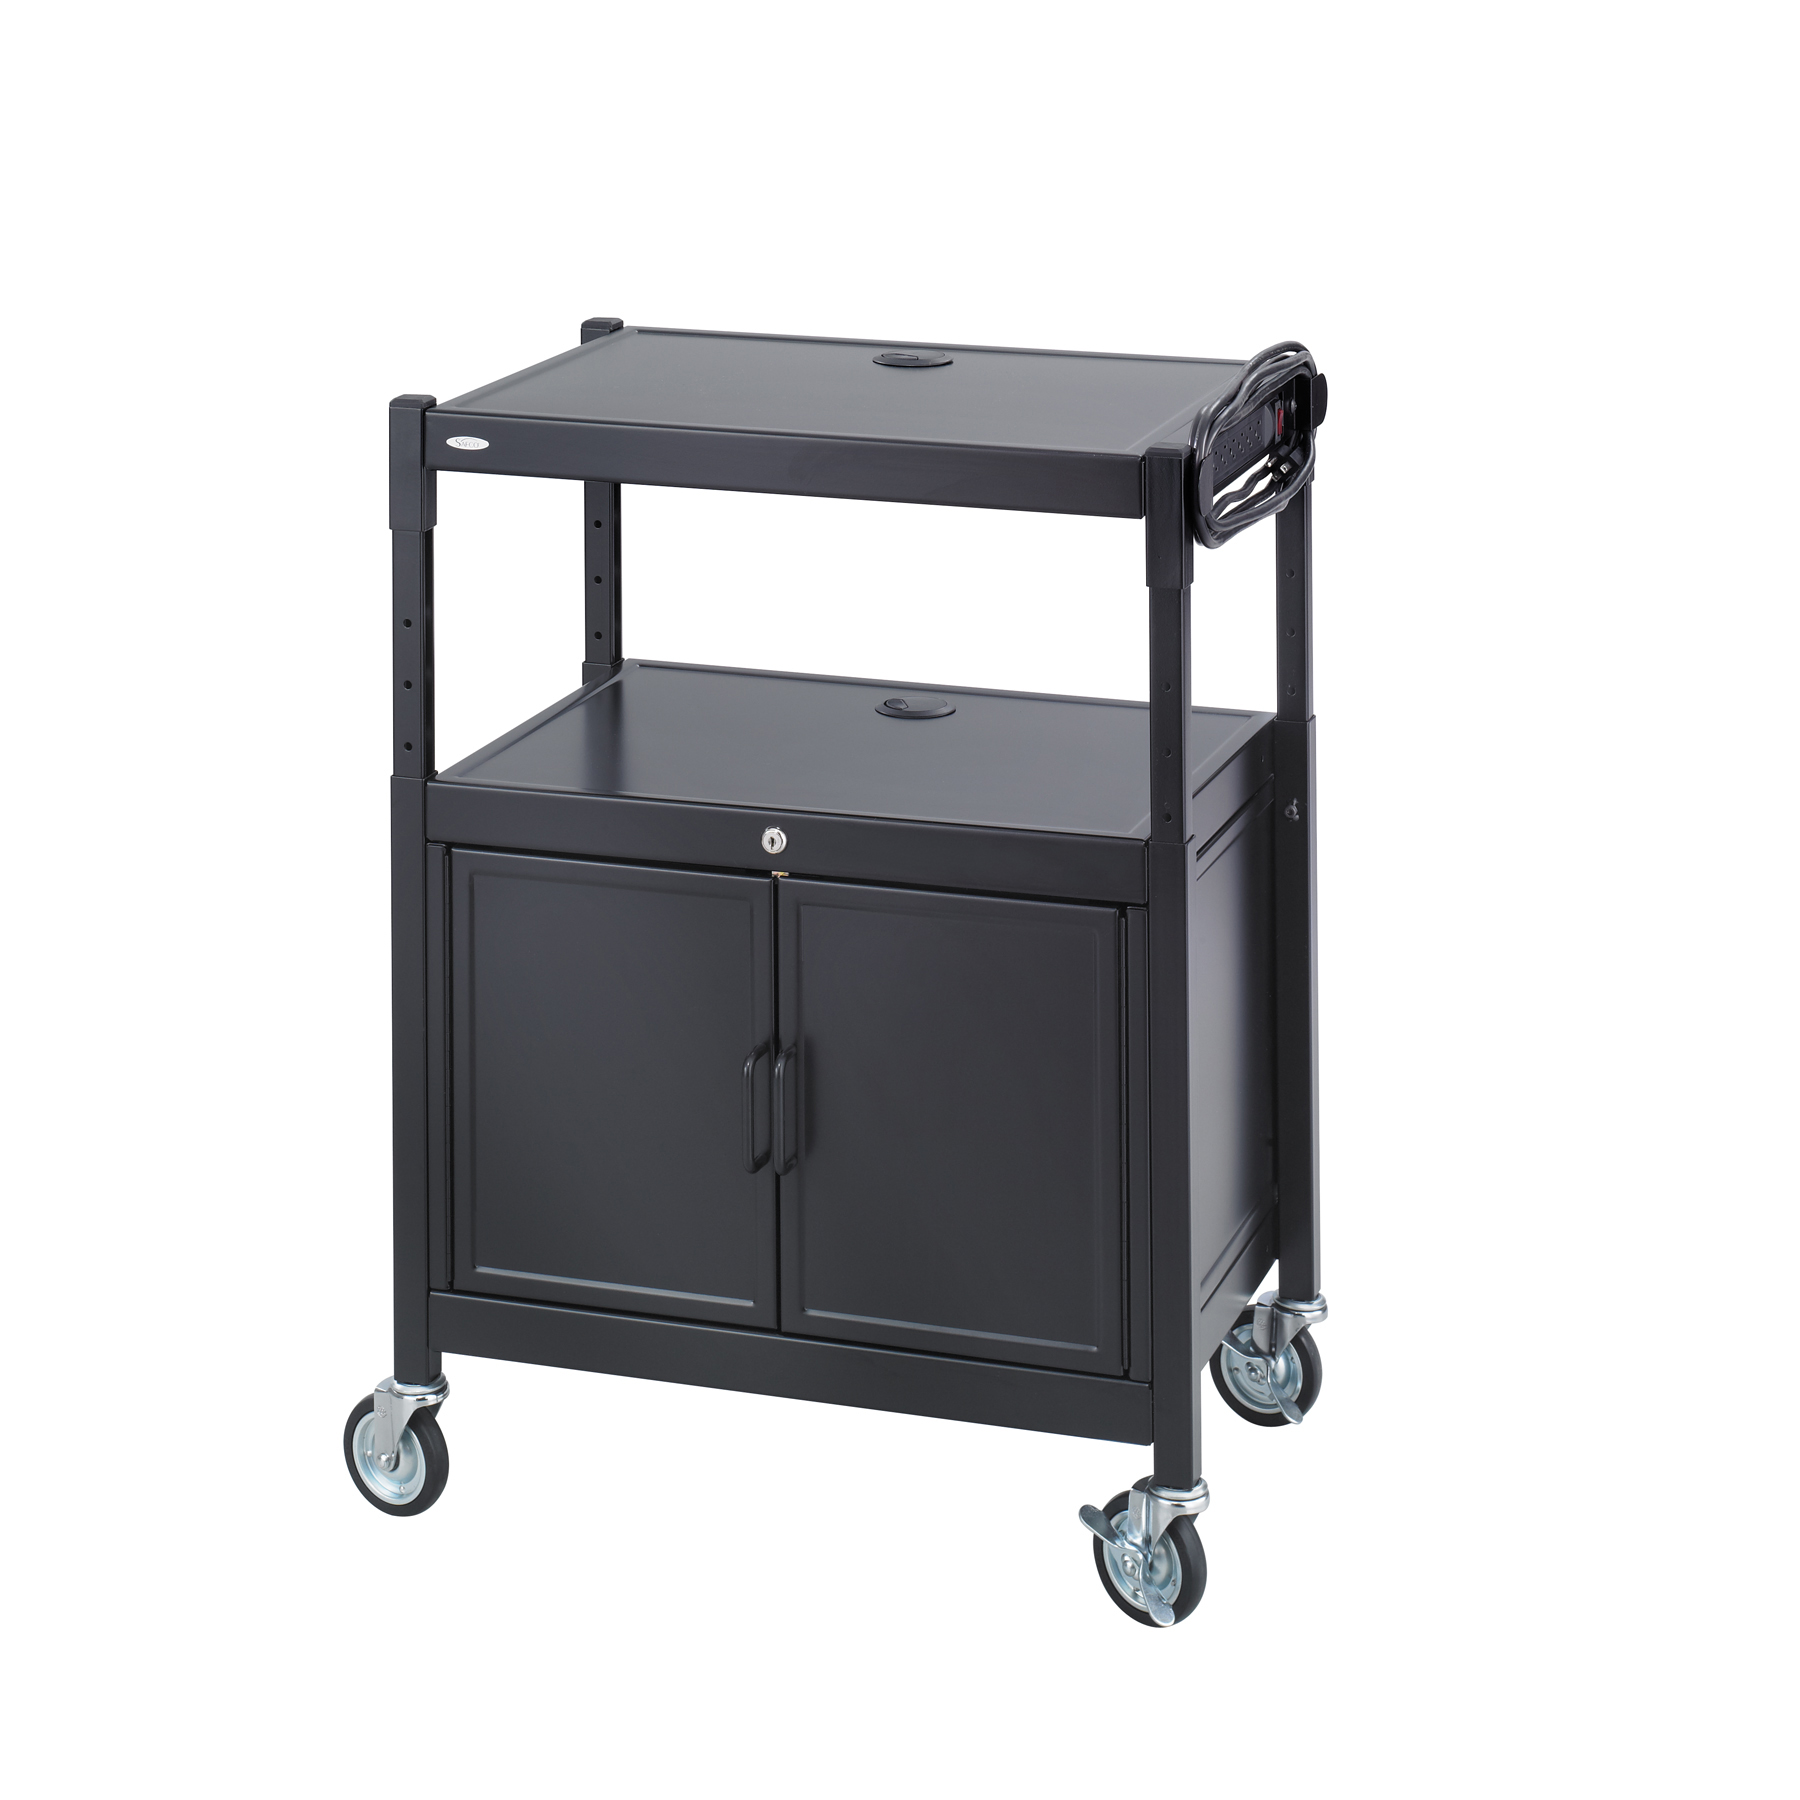 Safco Products Steel Adjustable Height Cart Black 8932BL